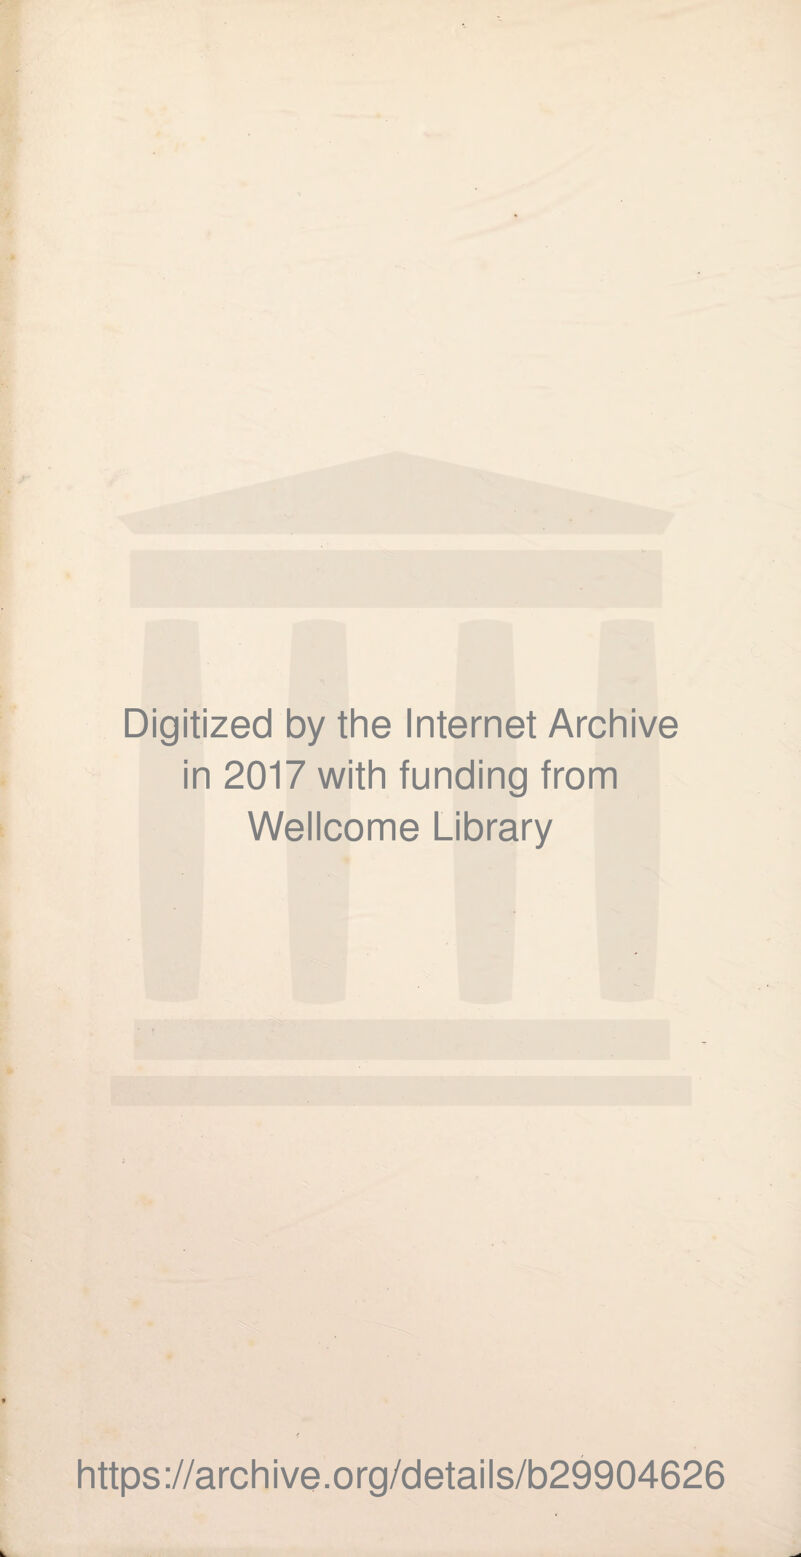 f r‘< '•w- ■i». - P ! Digitized by the Internet Archive in 2017 with funding from Wellcome Library https://archive.org/details/b29904626